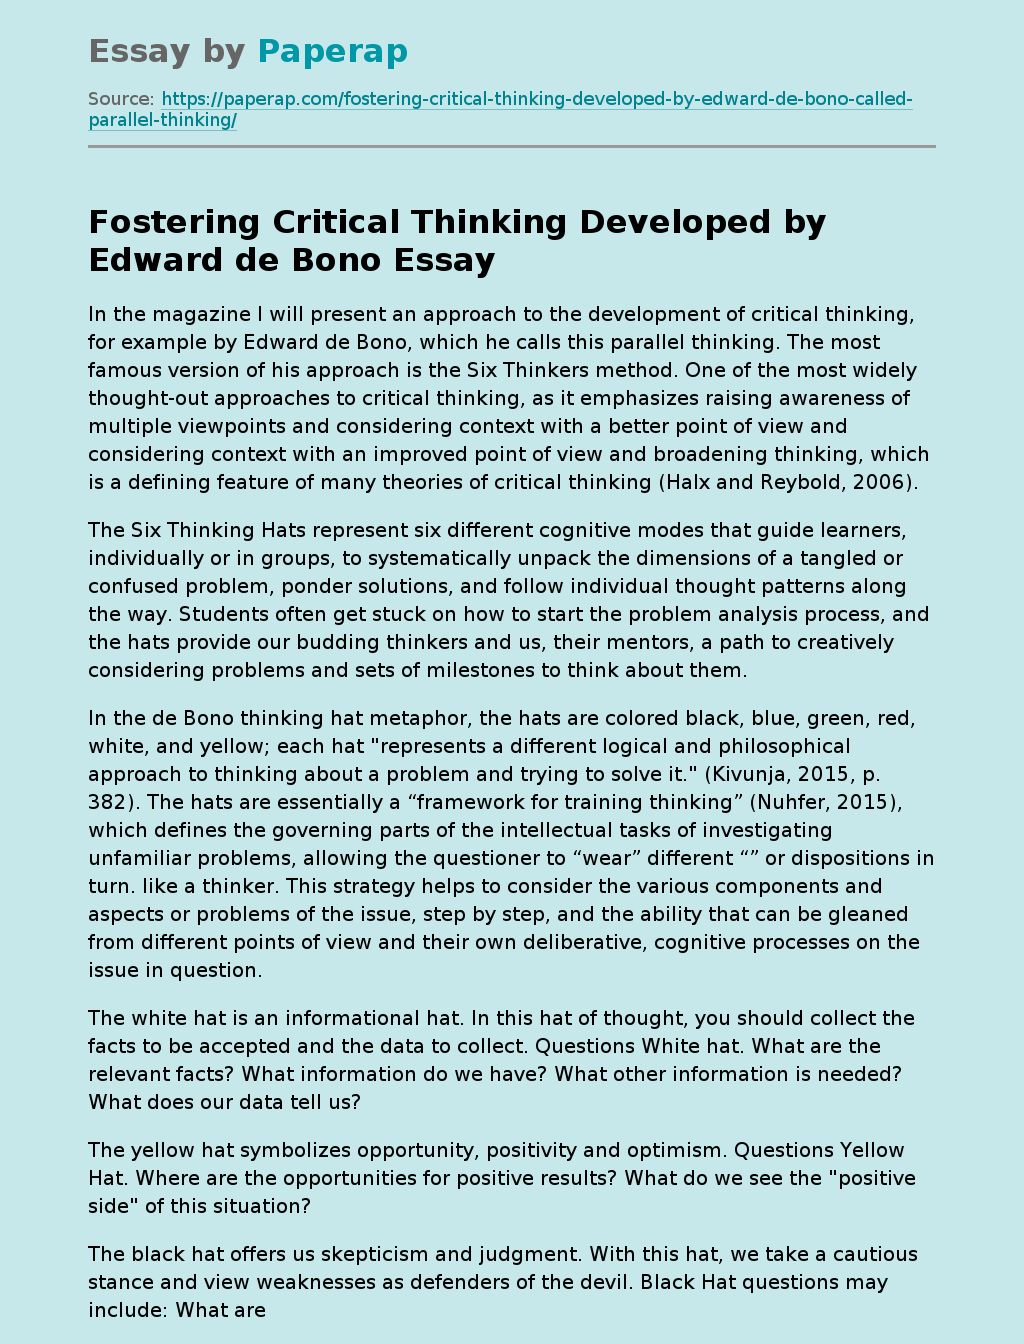 Fostering Critical Thinking Developed by Edward de Bono